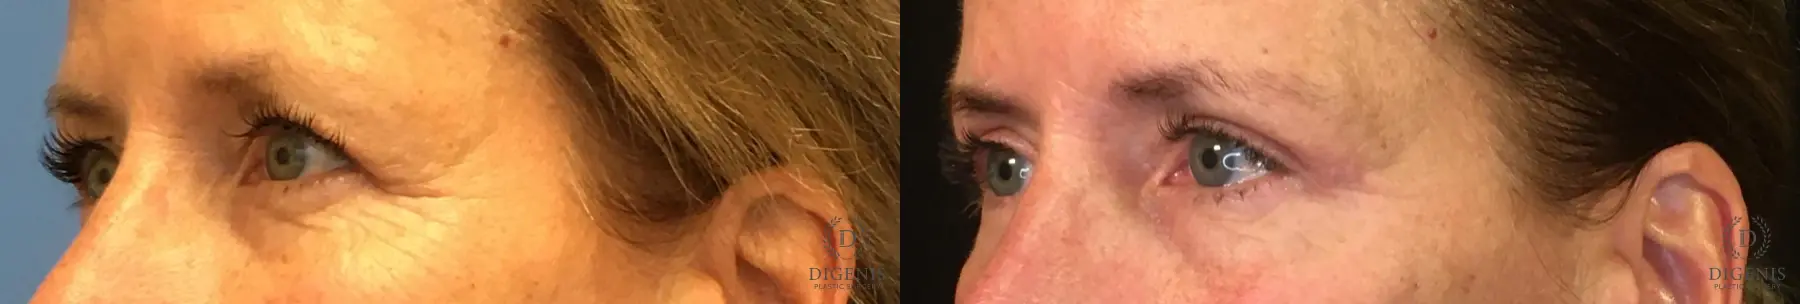 Eyelid Surgery: Patient 2 - Before and After 4